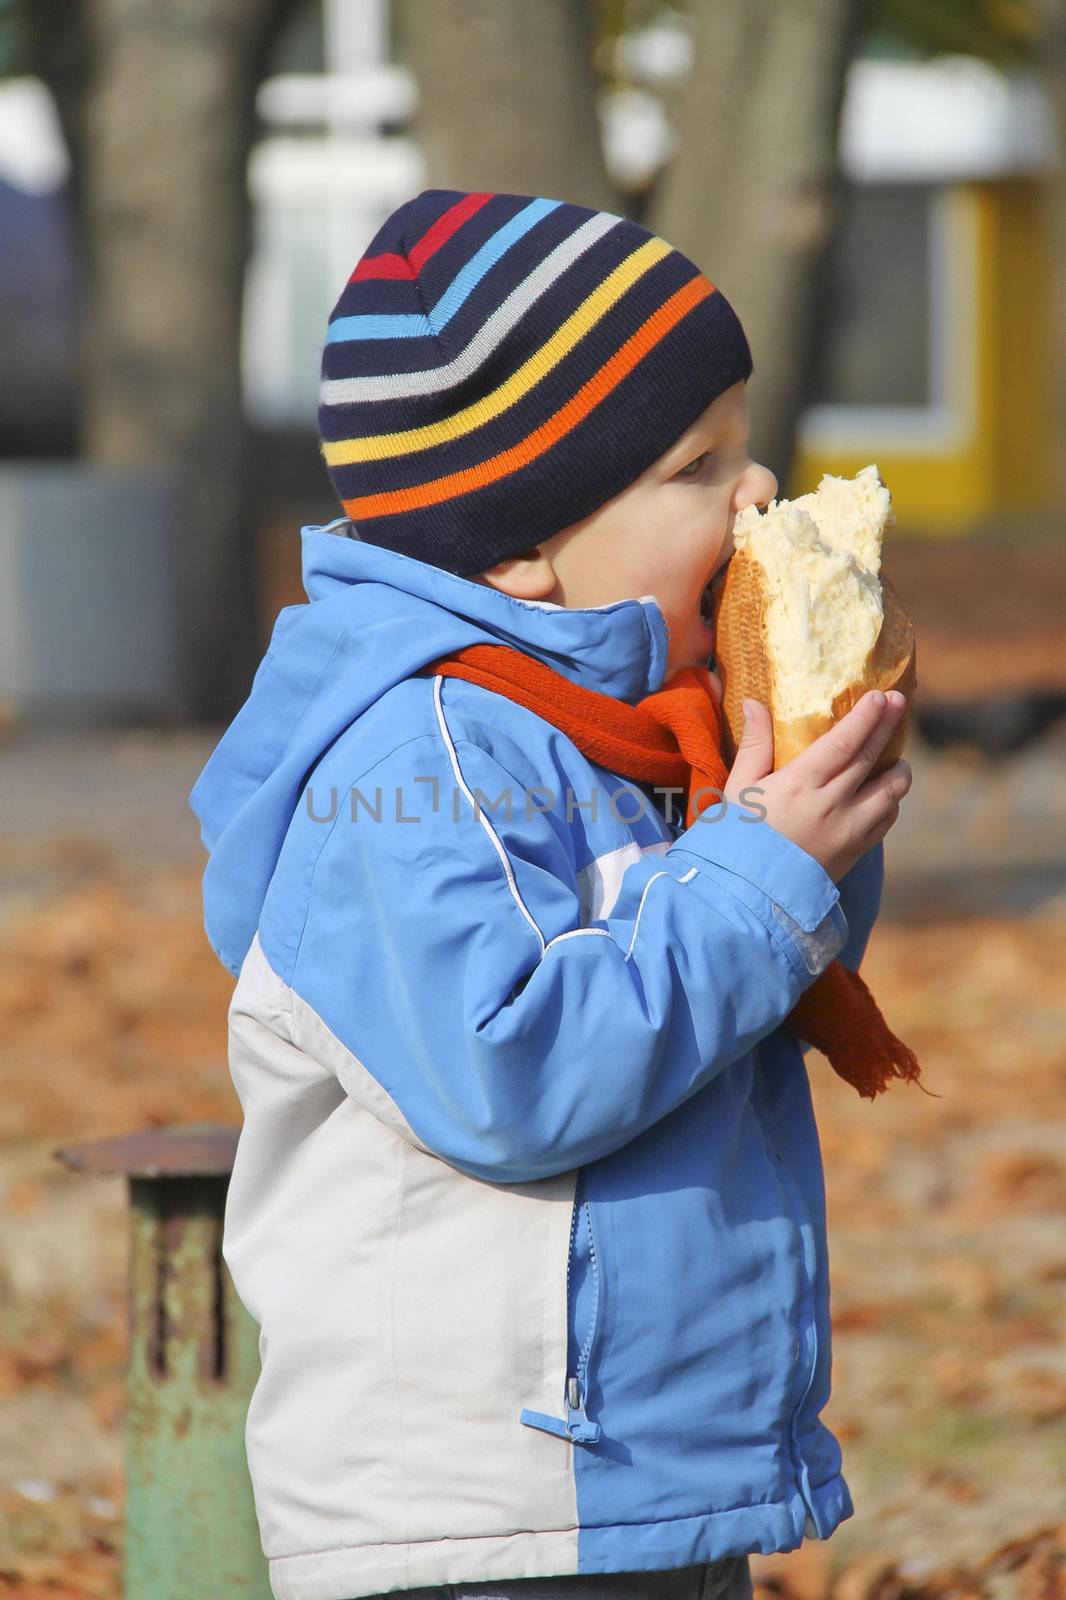 The kid eats bread during autumn walk in the park by NickNick